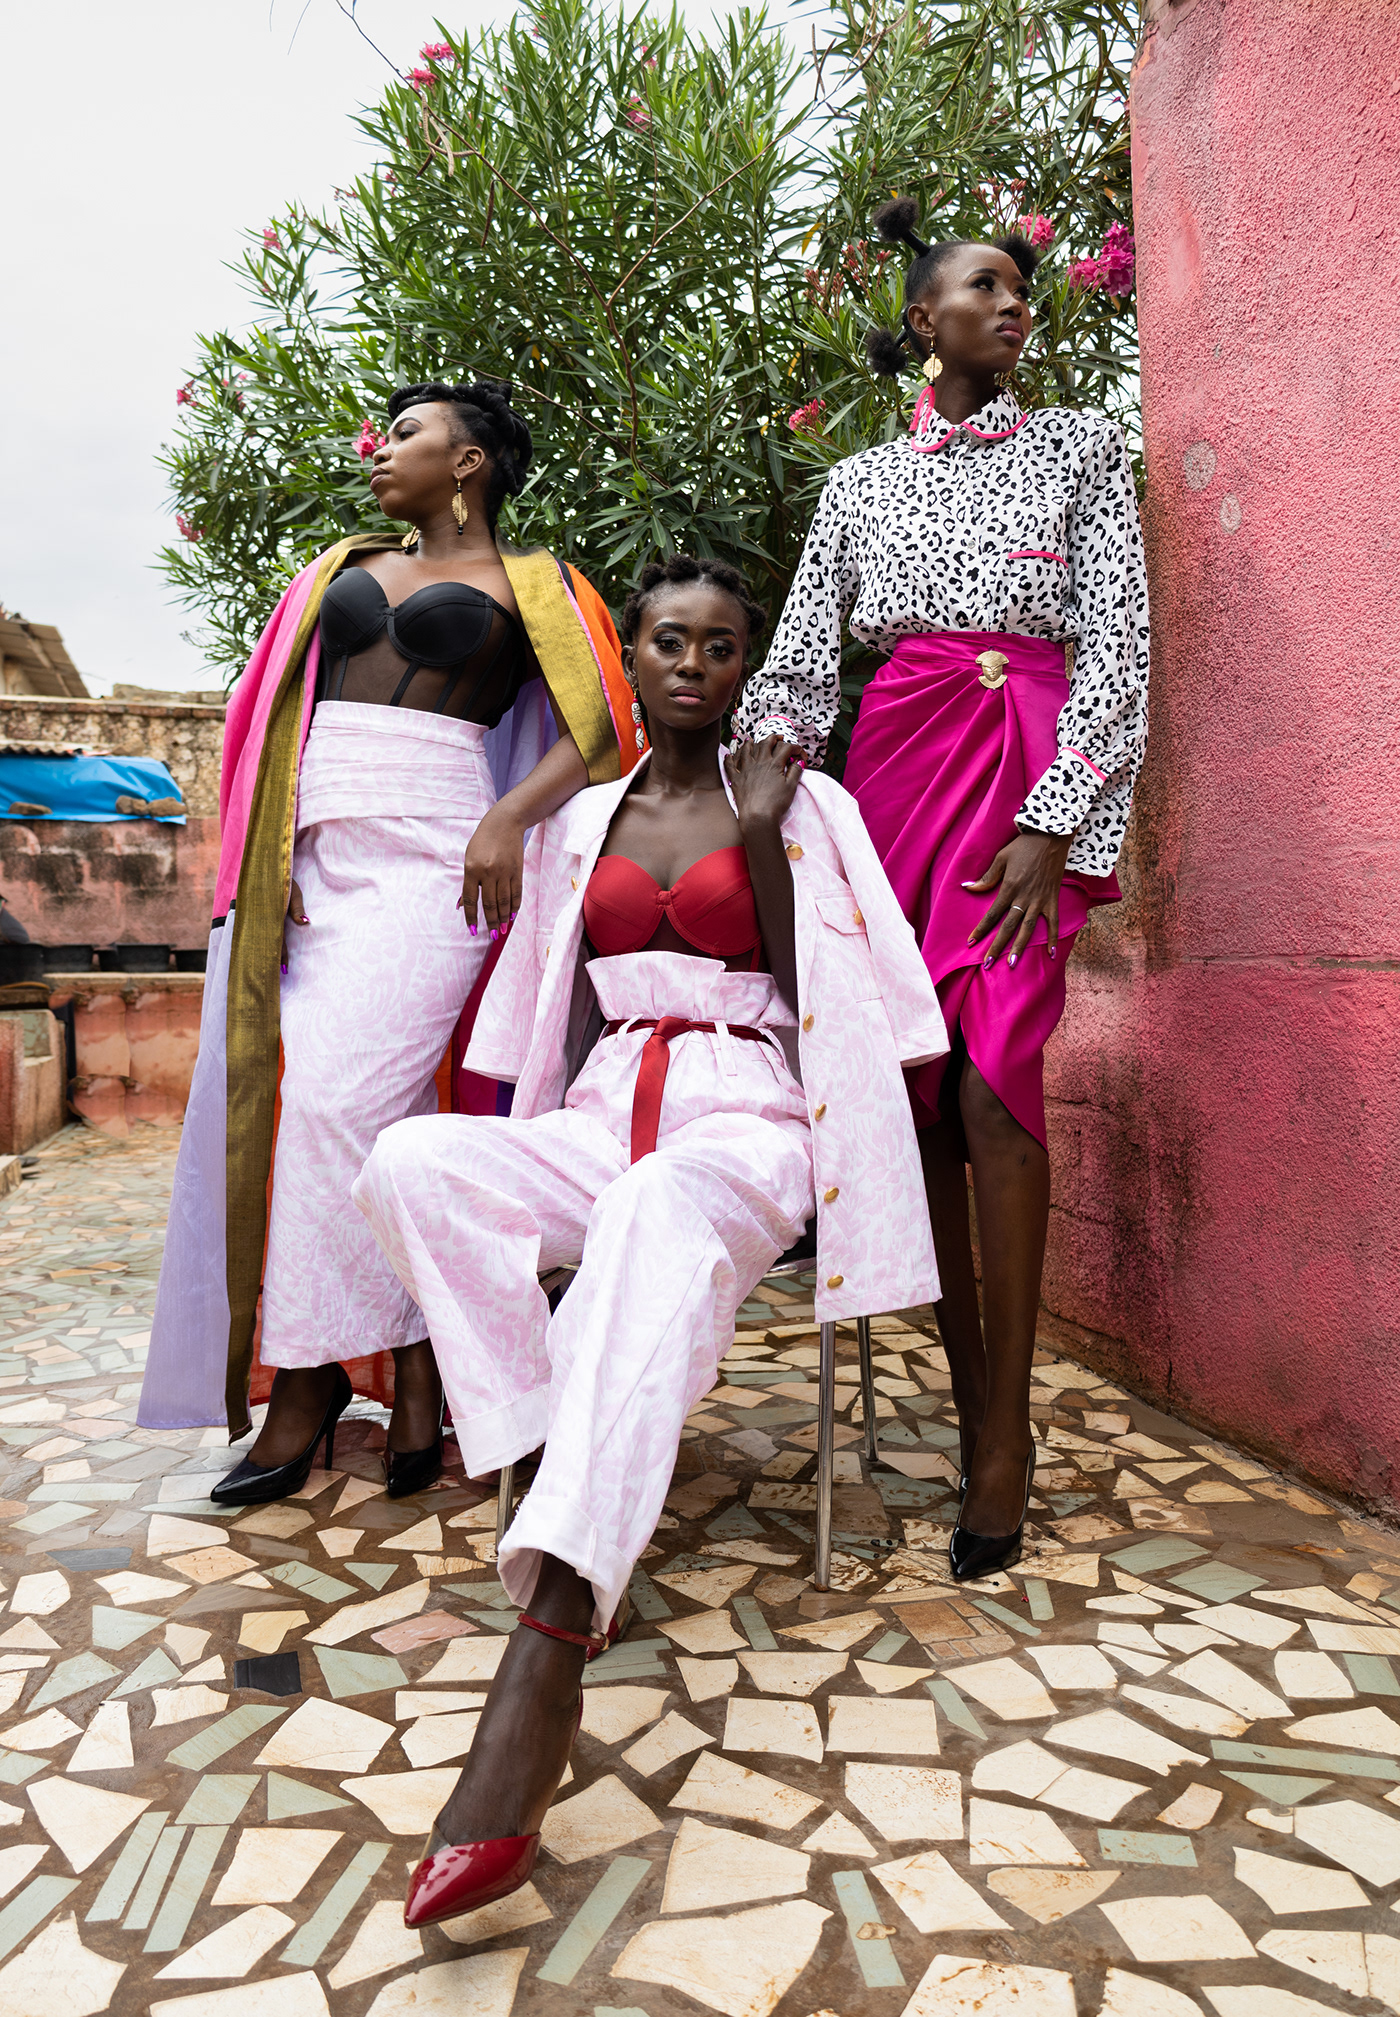 OOctobre Rose 2022 - Talented Marina Boucal - International Model from Senegal in-company of-Bella Penda and Jess-Tovignon - Picture by Khaled Fhemy Mamah - Design carefully crafted by Romzy Studio